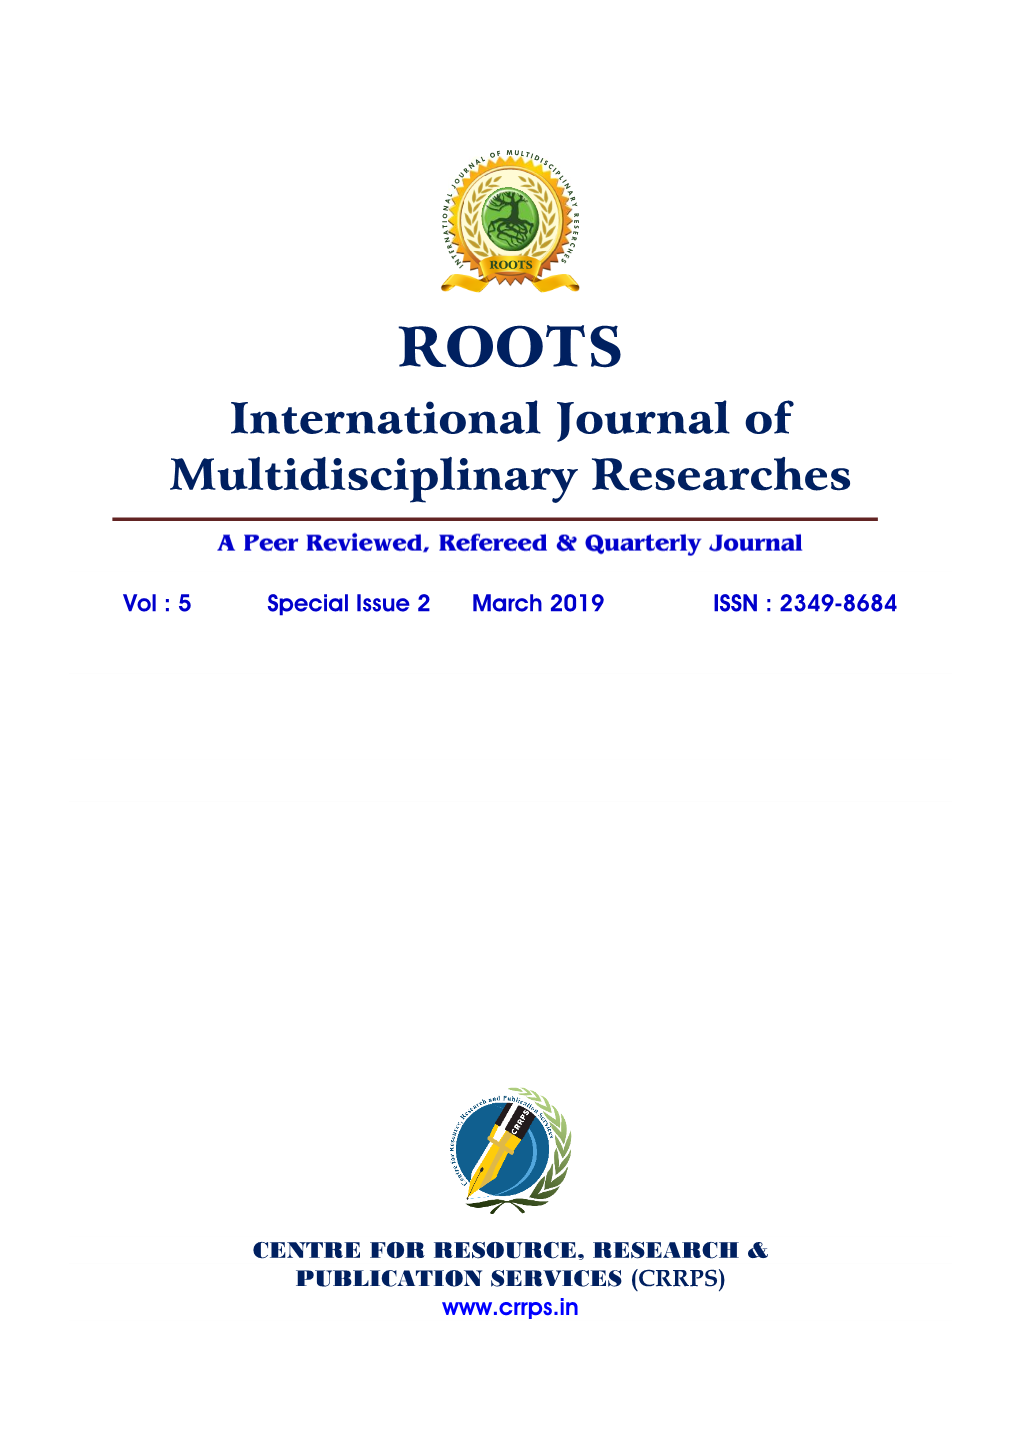 ROOTS International Journal of Multidisciplinary Researches